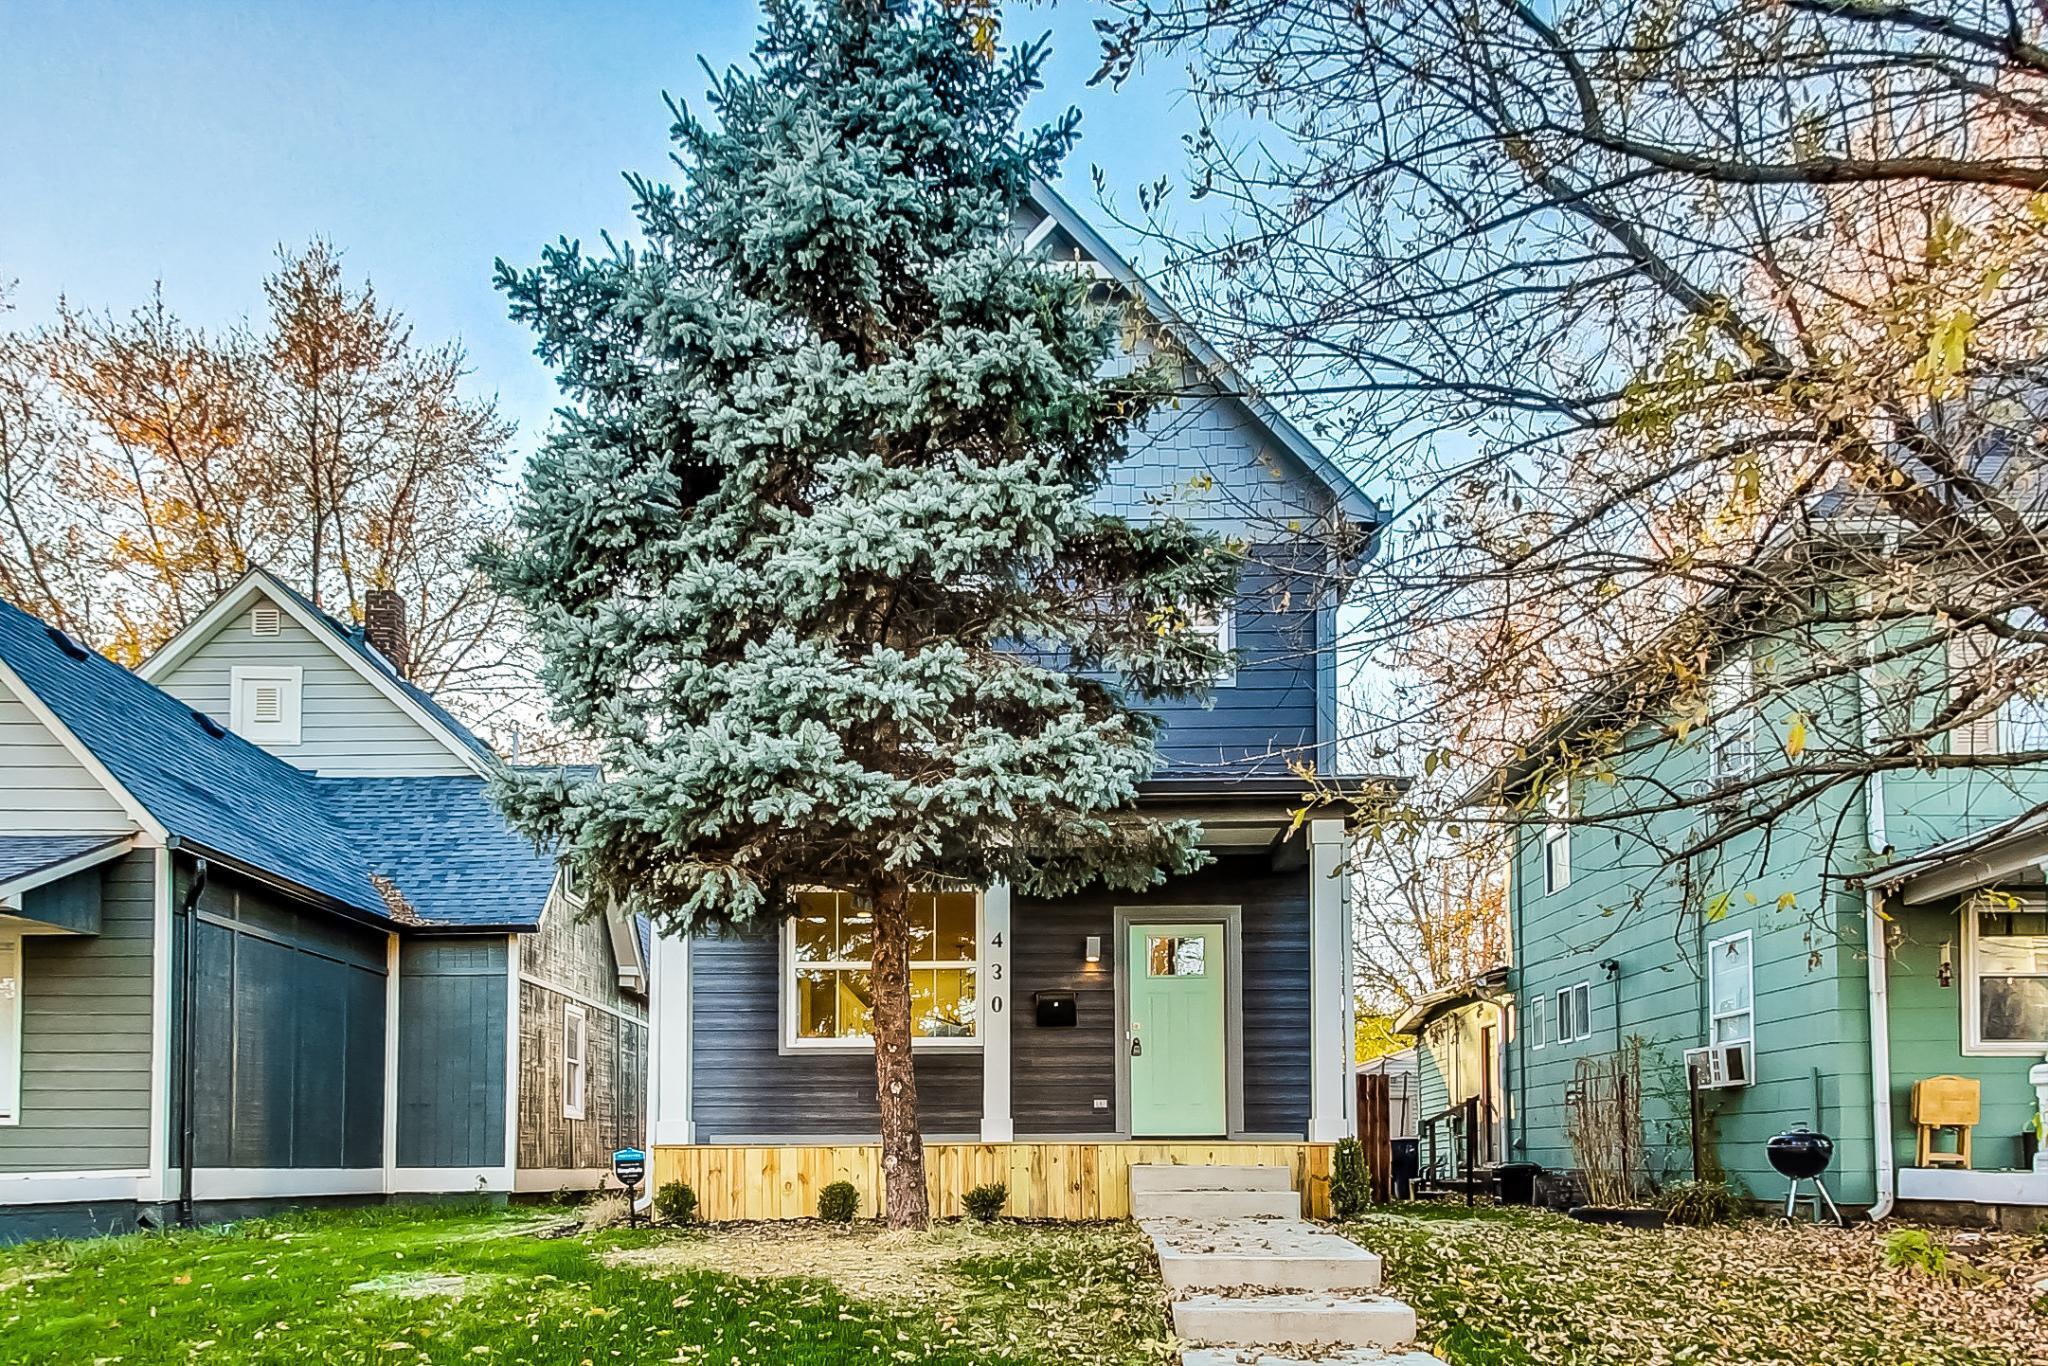 Photo one of 430 N Keystone Ave Indianapolis IN 46201 | MLS 21954637